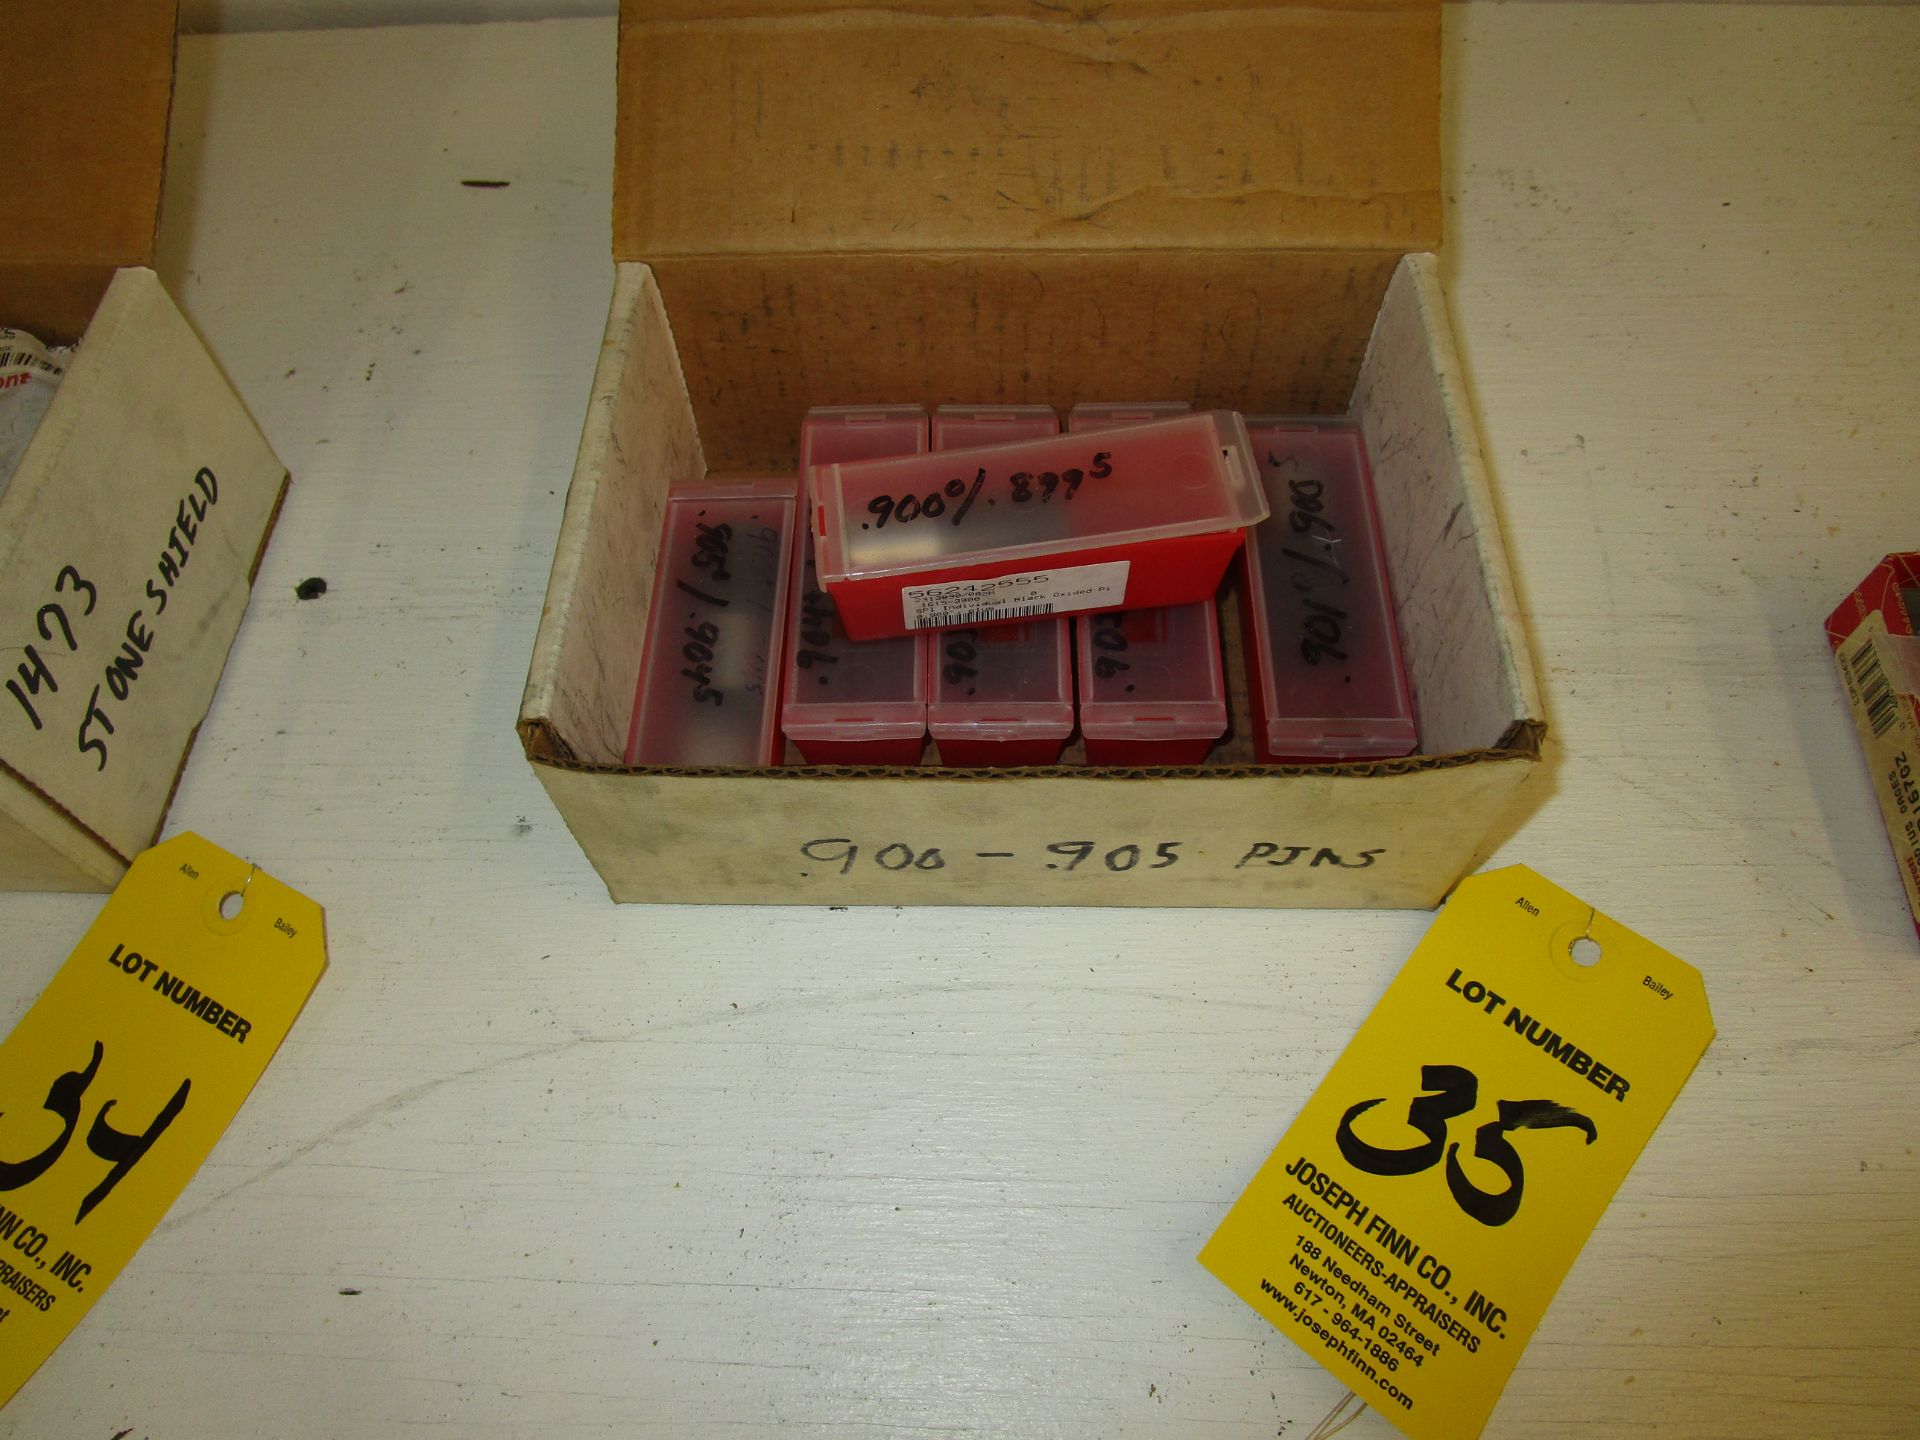 LOT Misc. .900 - .905 Plug Gages